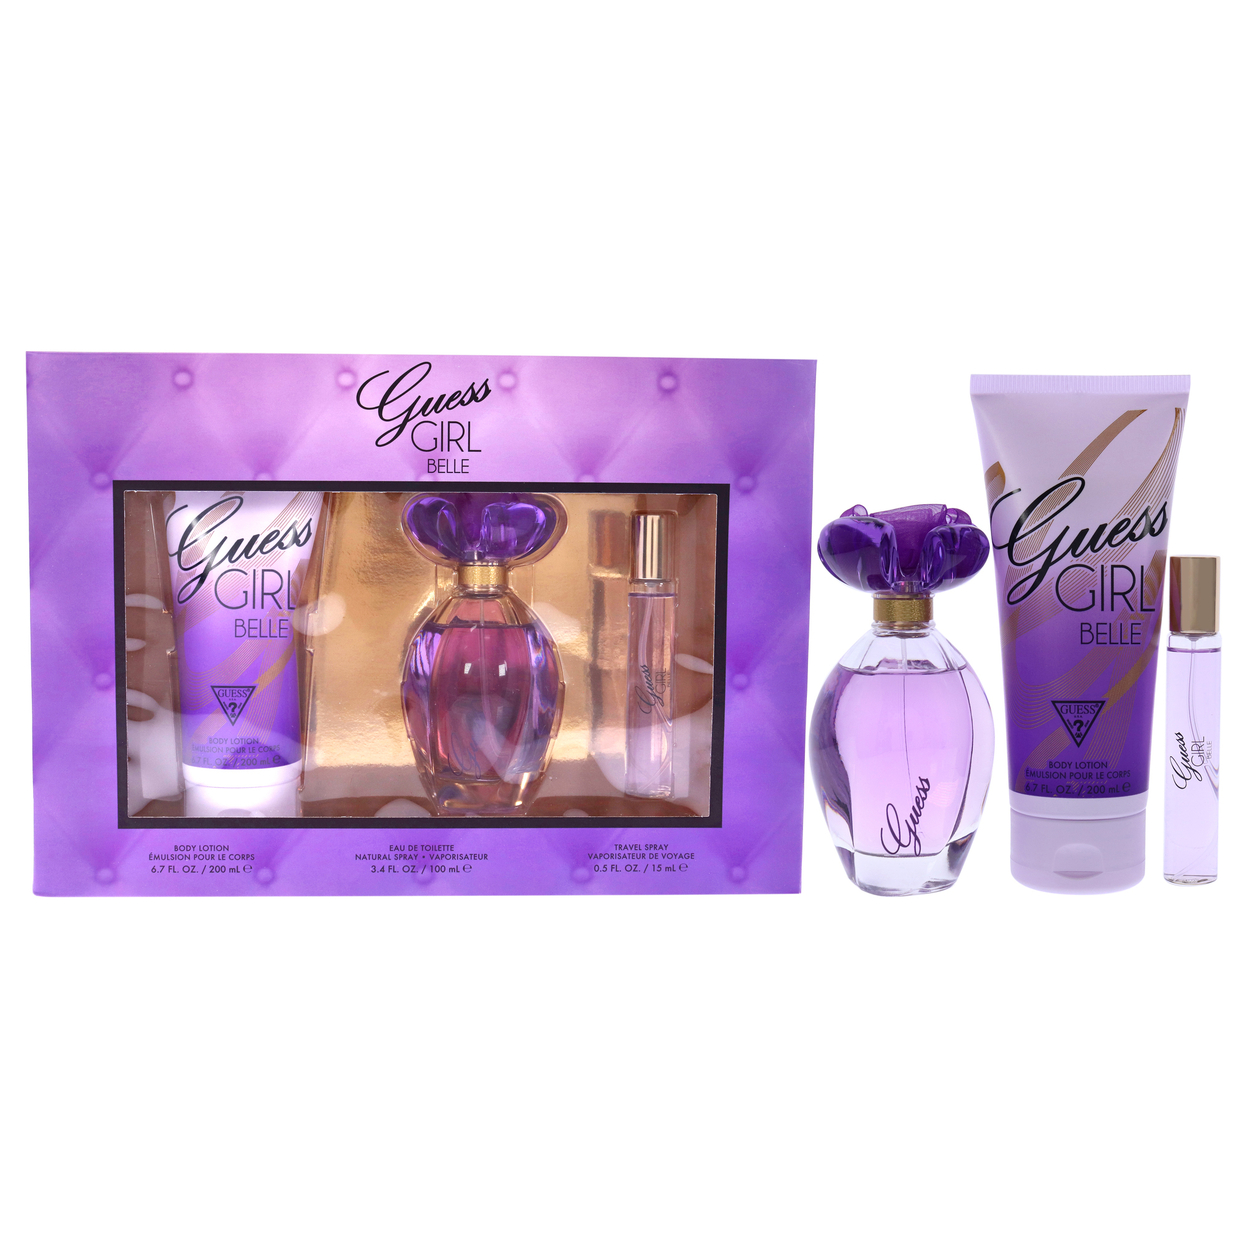 Guess Girl Belle 3 Pc Gift Set 3 Pc Gift Set